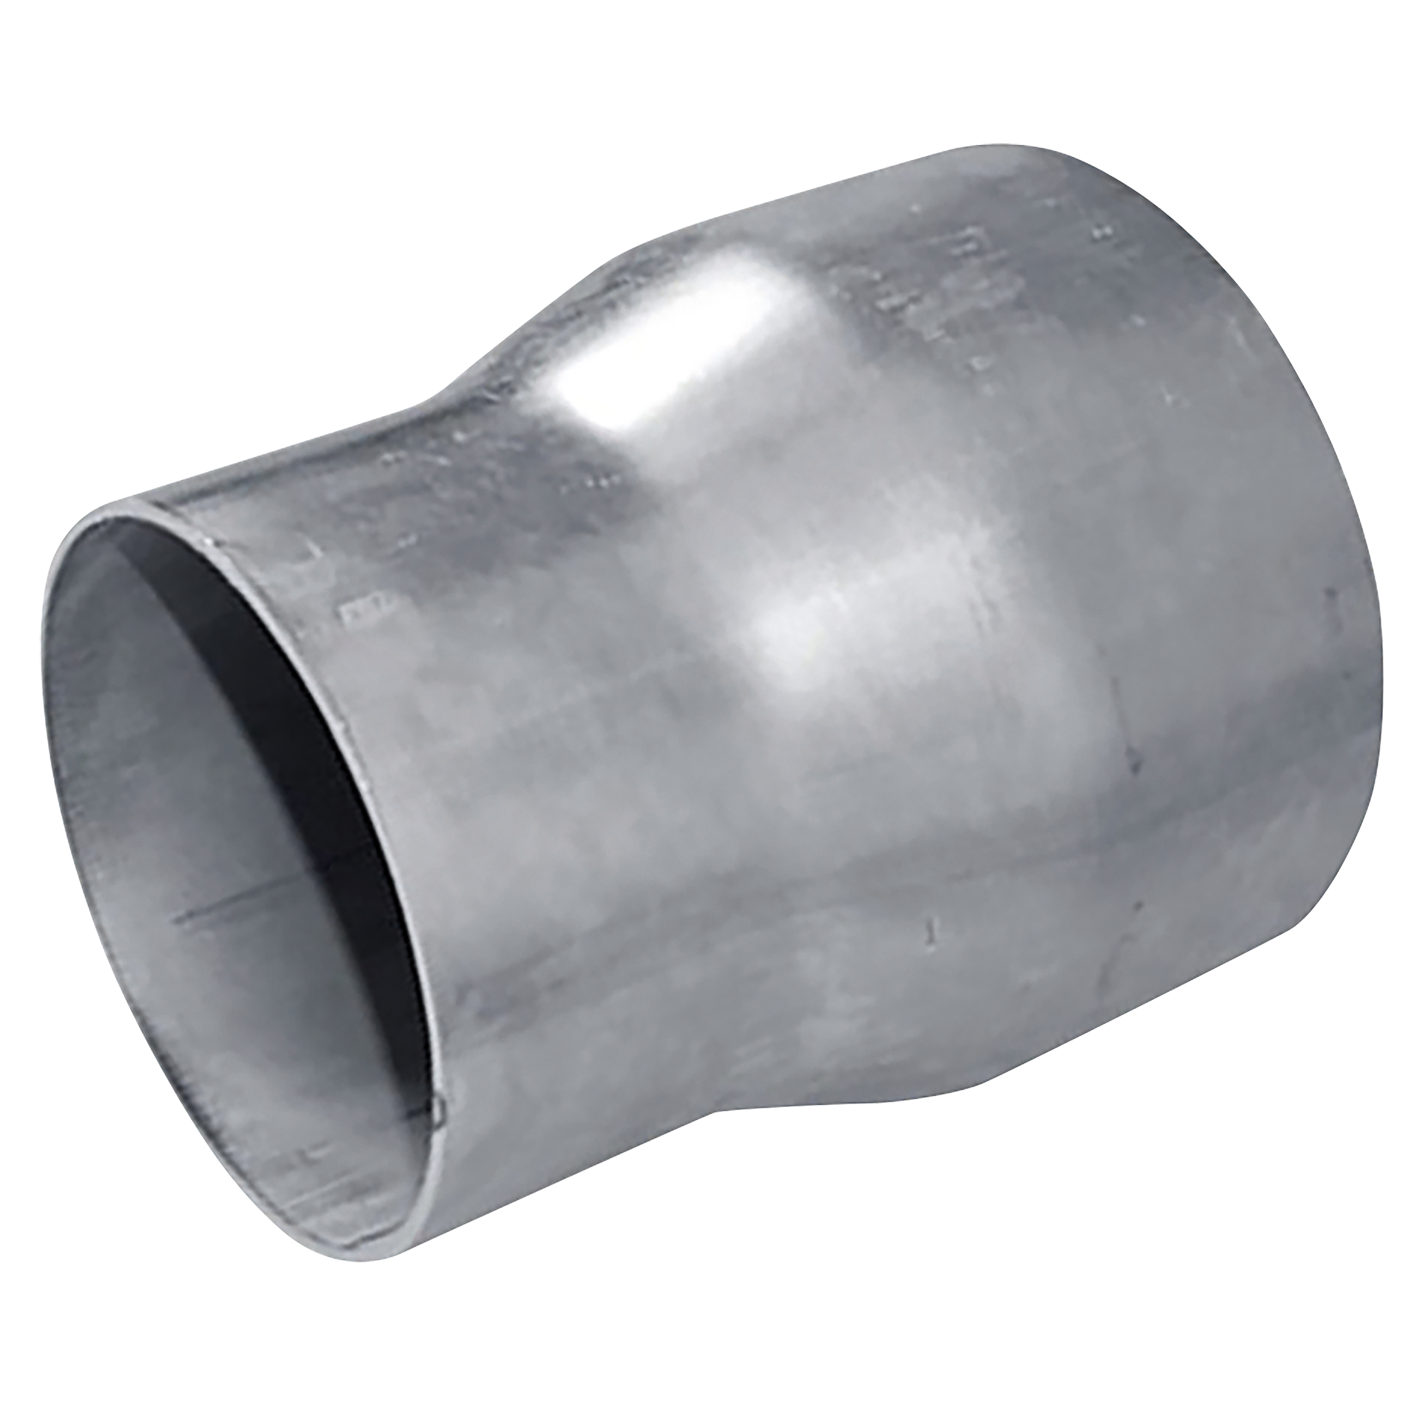 STEEL REDUCING CONE 127MM-102MM OD